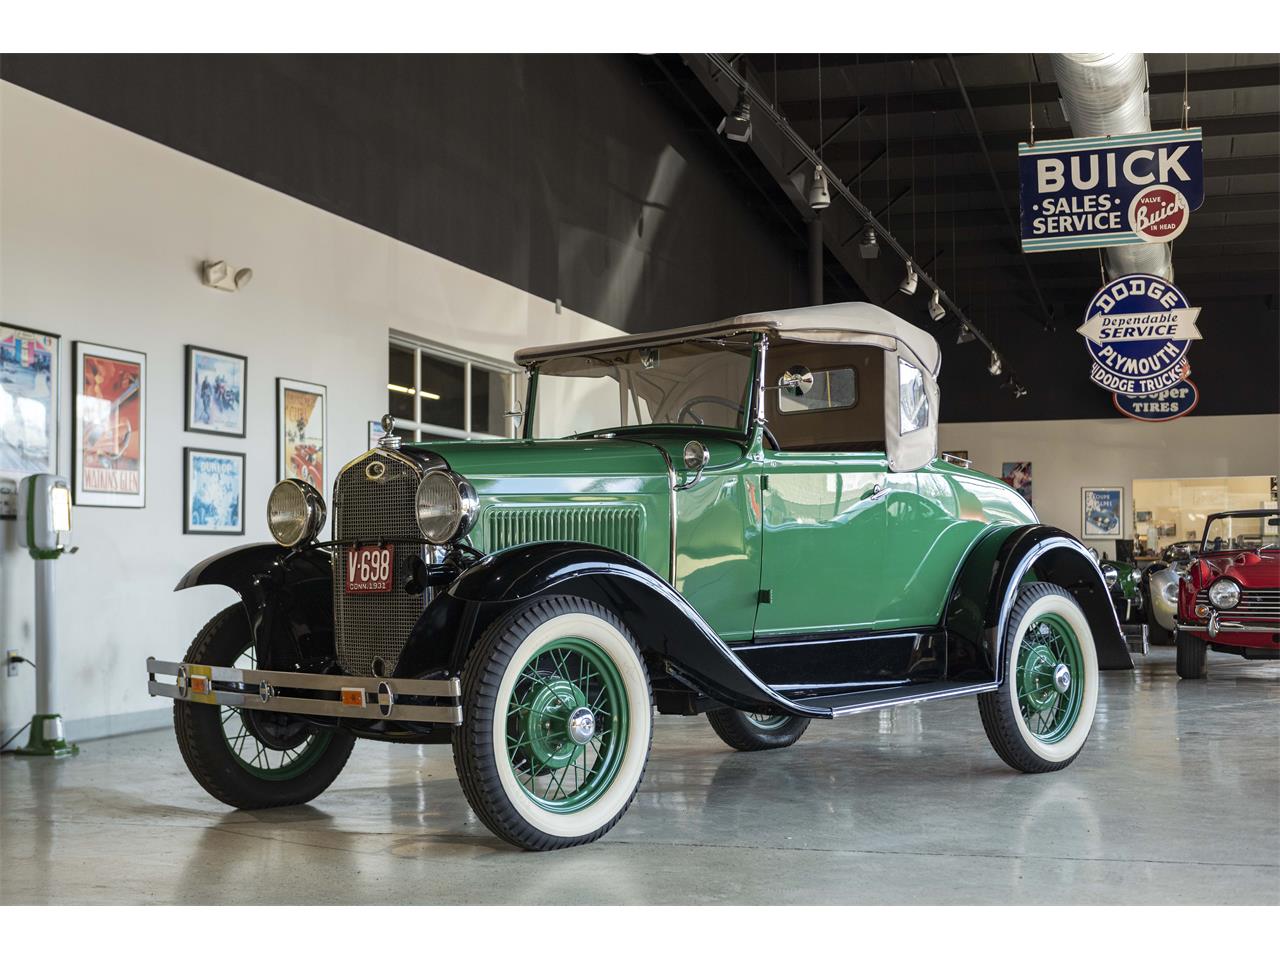 For Sale: 1930 Ford Model A Roadster in Stratford, Connecticut for sale in Stratford, CT